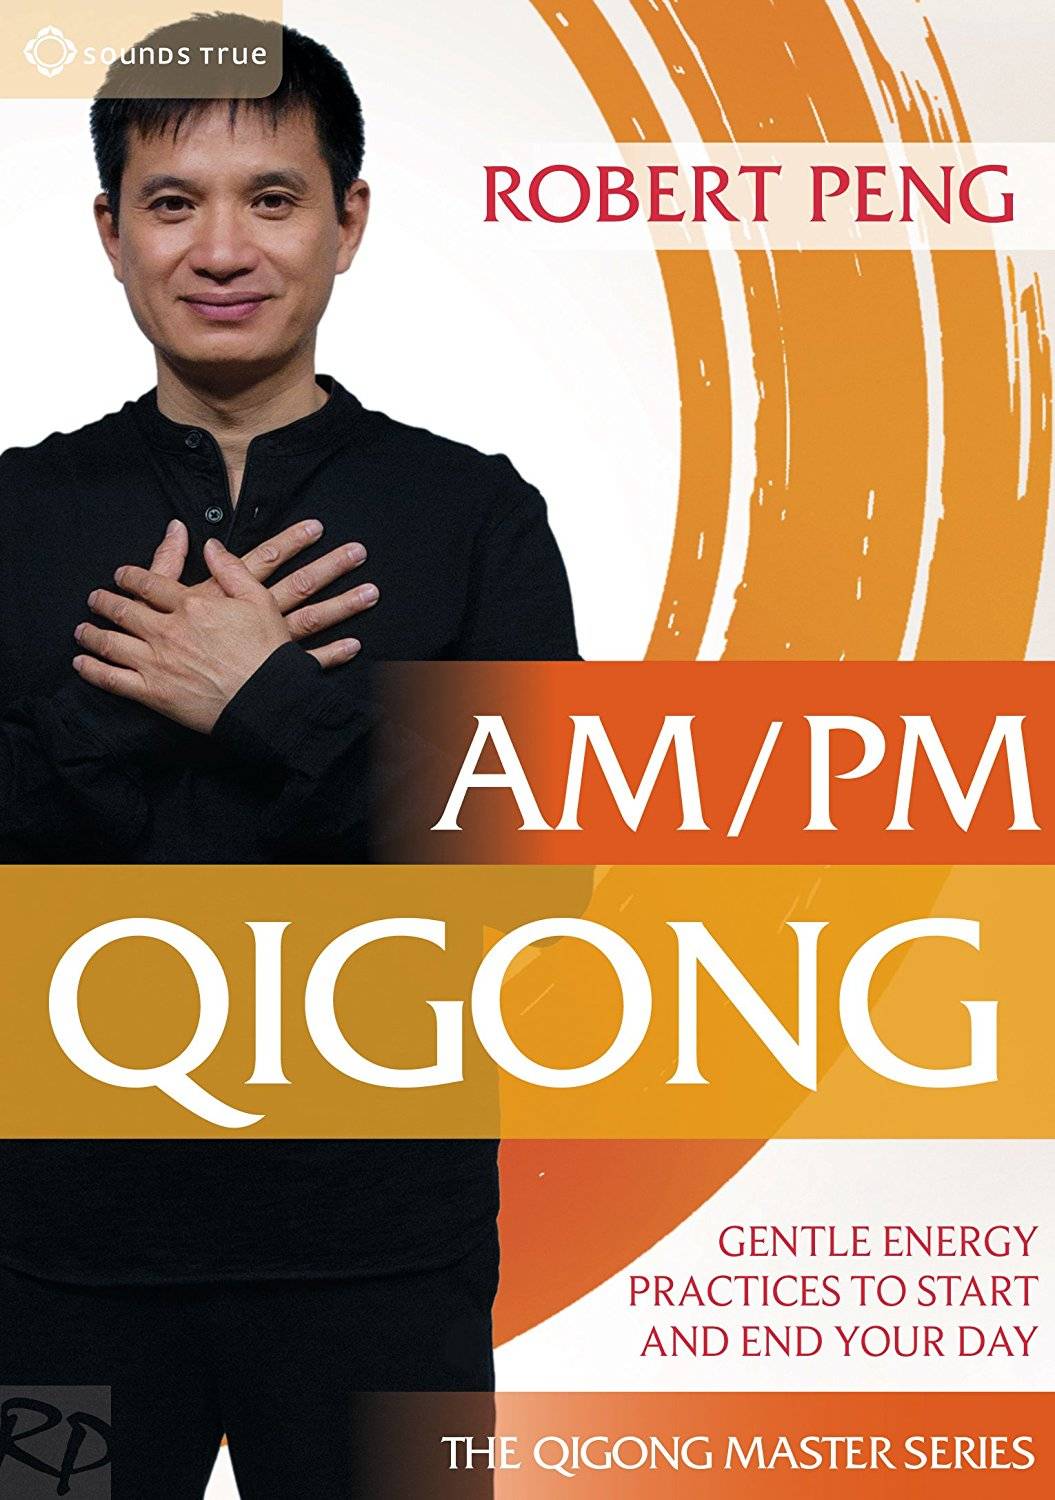 AM/PM Qigong : Gentle Energy Practices to Start and End Your Day